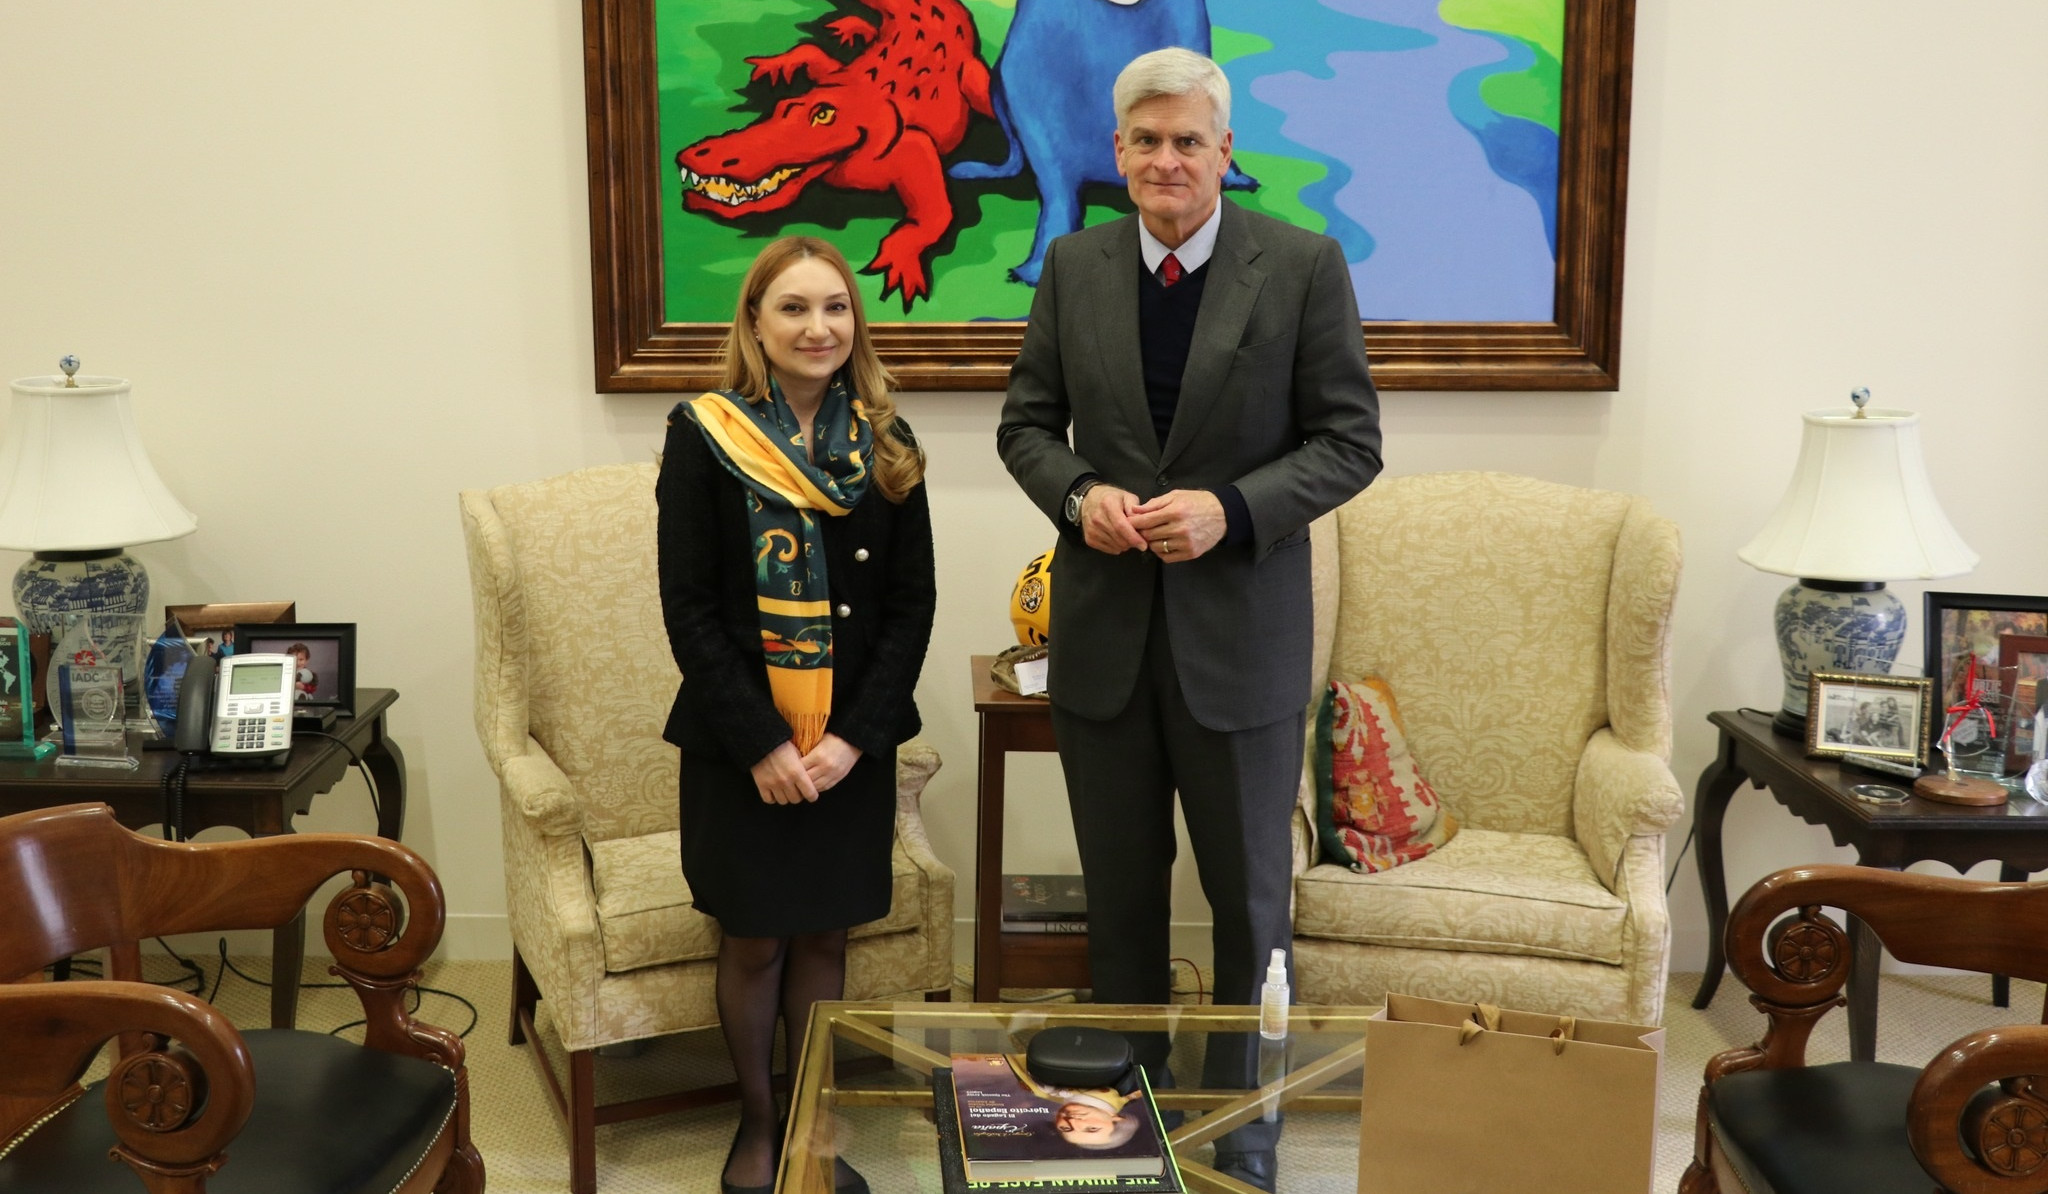 Lilit Makunts and US Senator Bill Cassidy discussed regional security issues